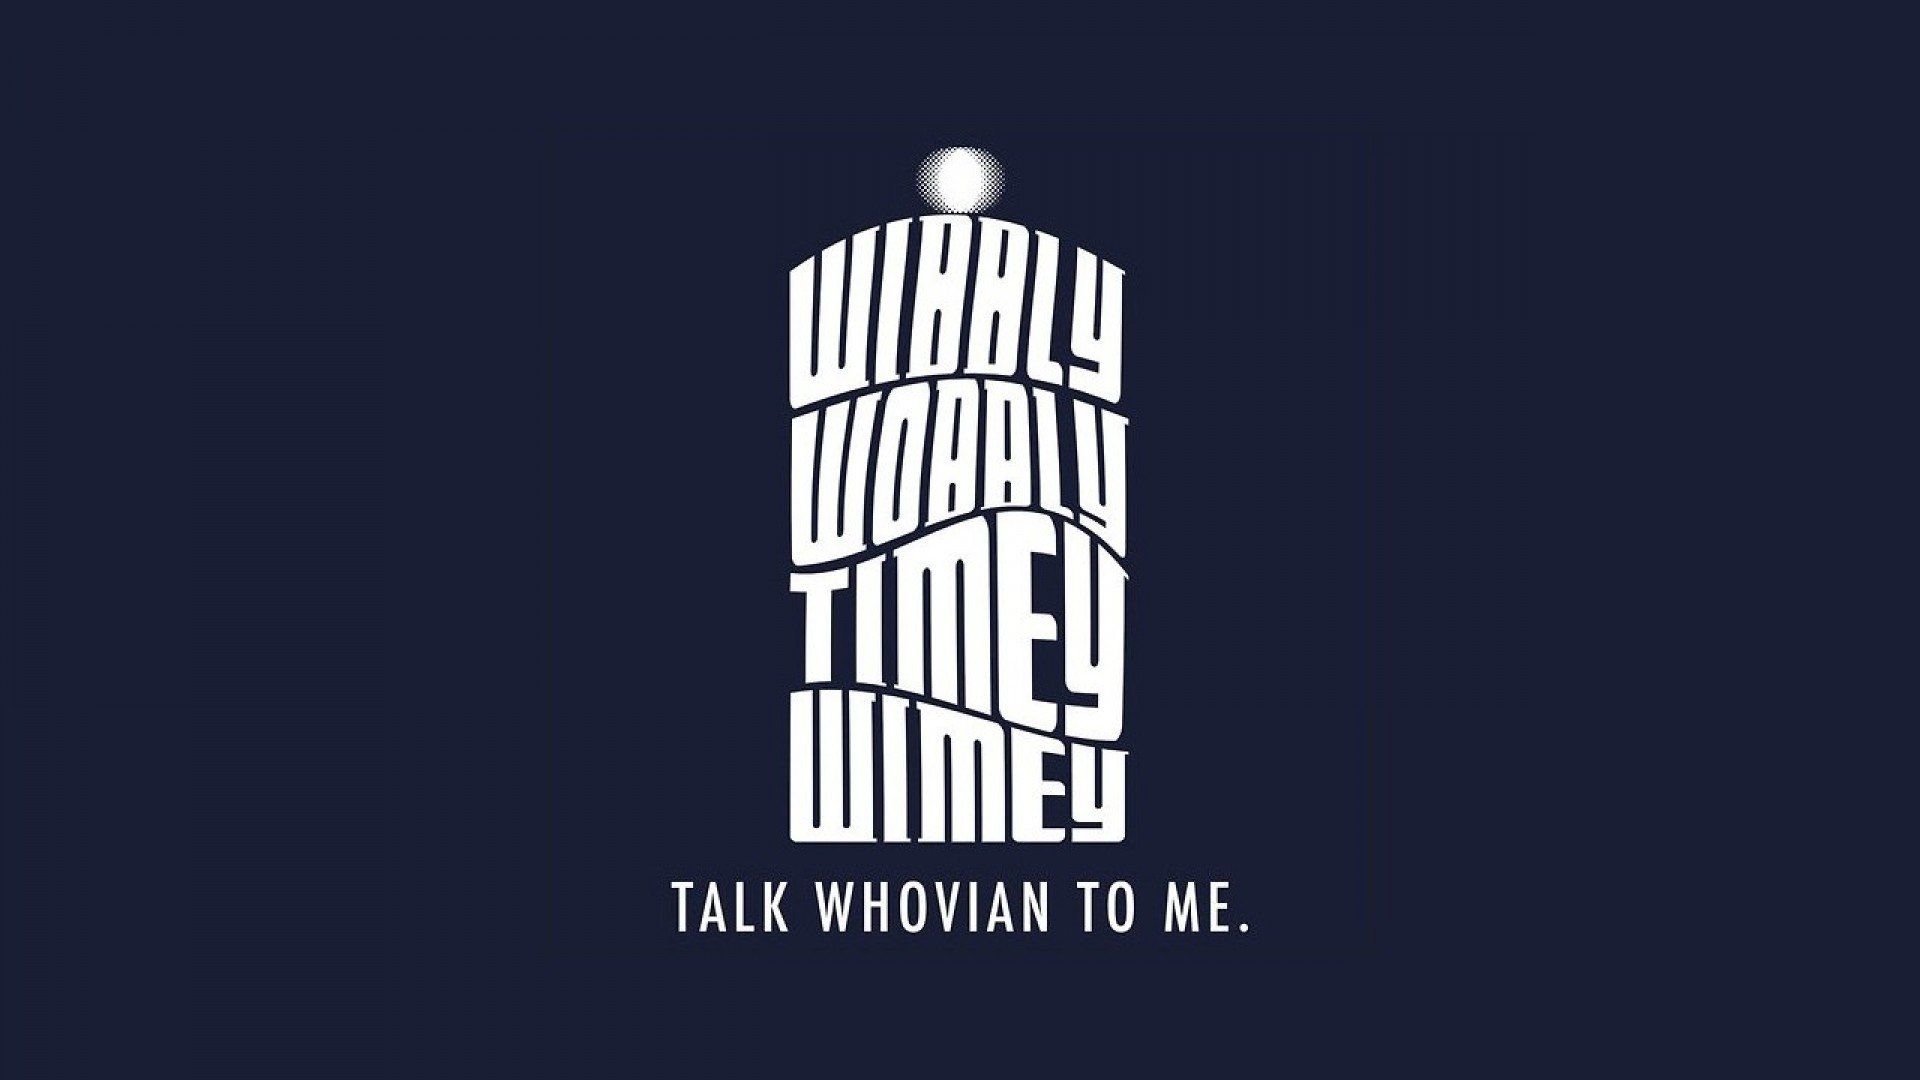 Doctor Who Wallpapers Tardis Wallpaper WallDevil - Best free HD